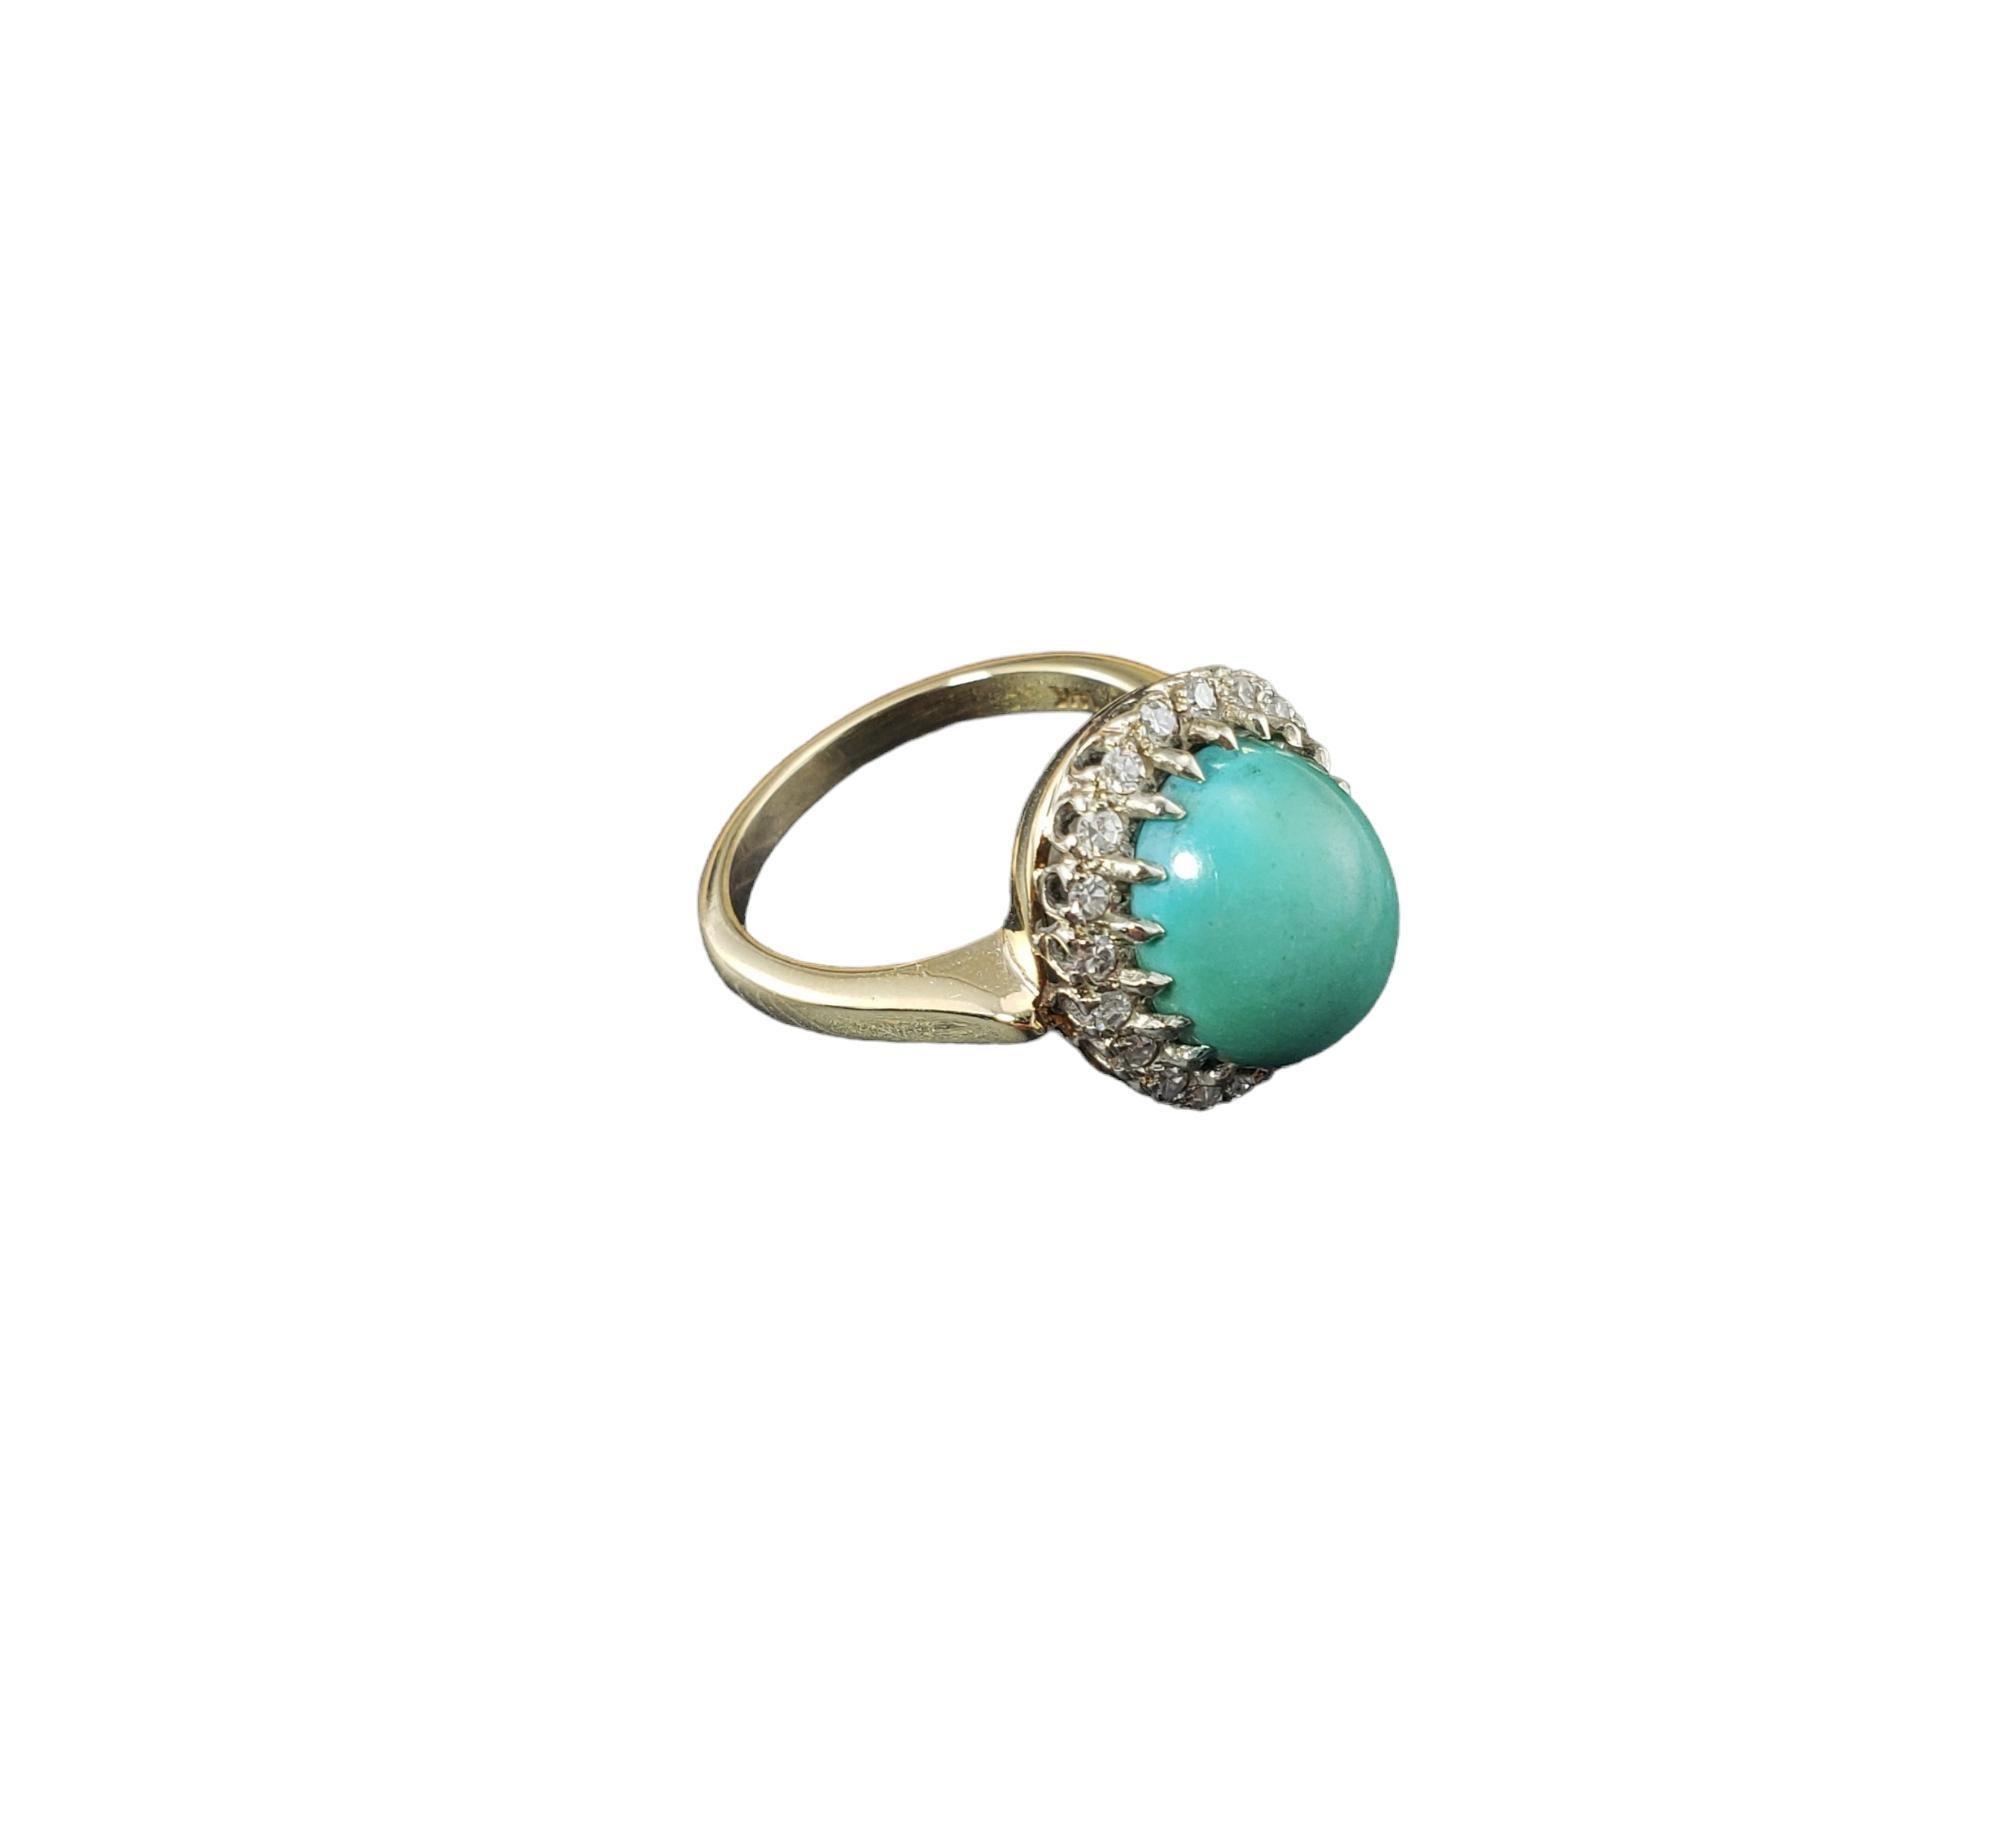 14K Yellow Gold Turquoise and Diamond Ring Size 6.5-6.75 JAGi Certifed-

This stunning ring features one oval cabochon cut turquoise stone (11.7mm x 9.7 mm) and 20 round single cut diamonds* set in classic 14K yellow gold.  

Width: 16 mm. Shank: 2